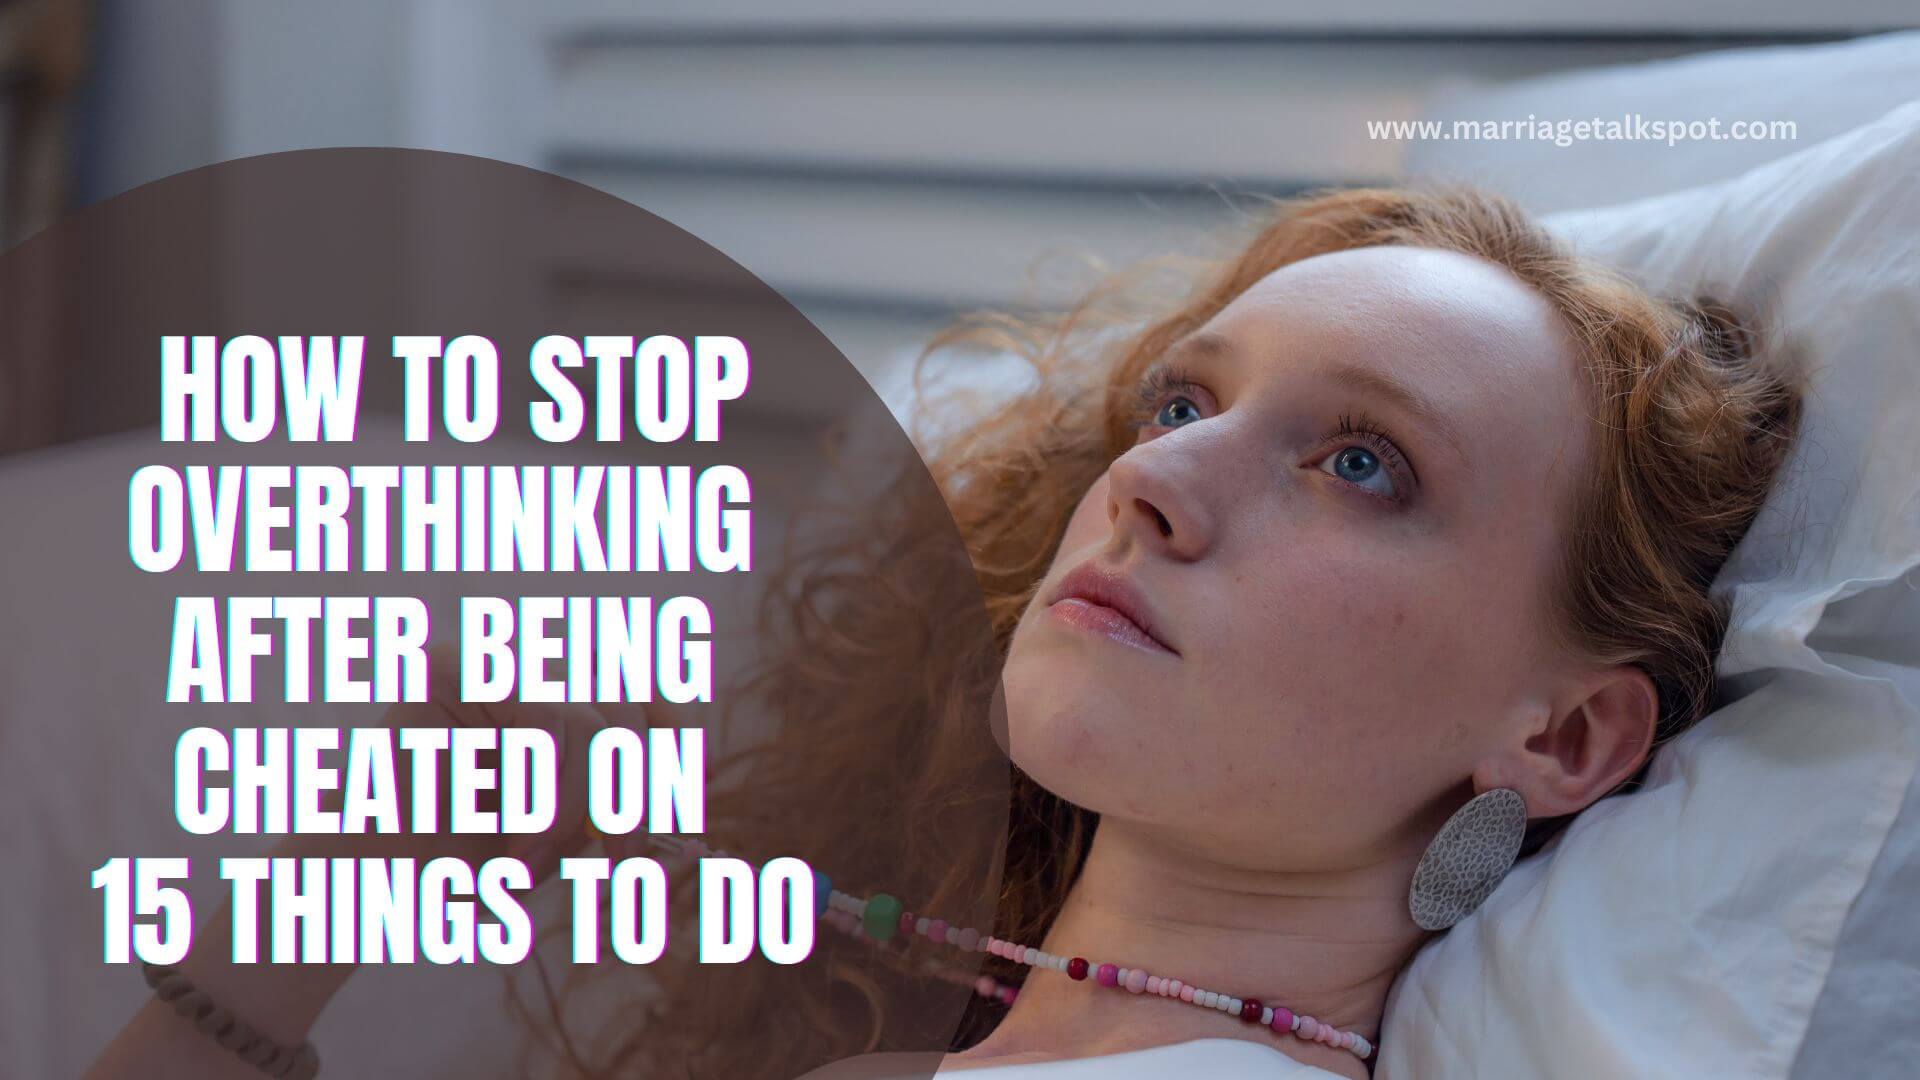 HOW TO STOP OVERTHINKING AFTER BEING CHEATED ON 15 THINGS TO DO